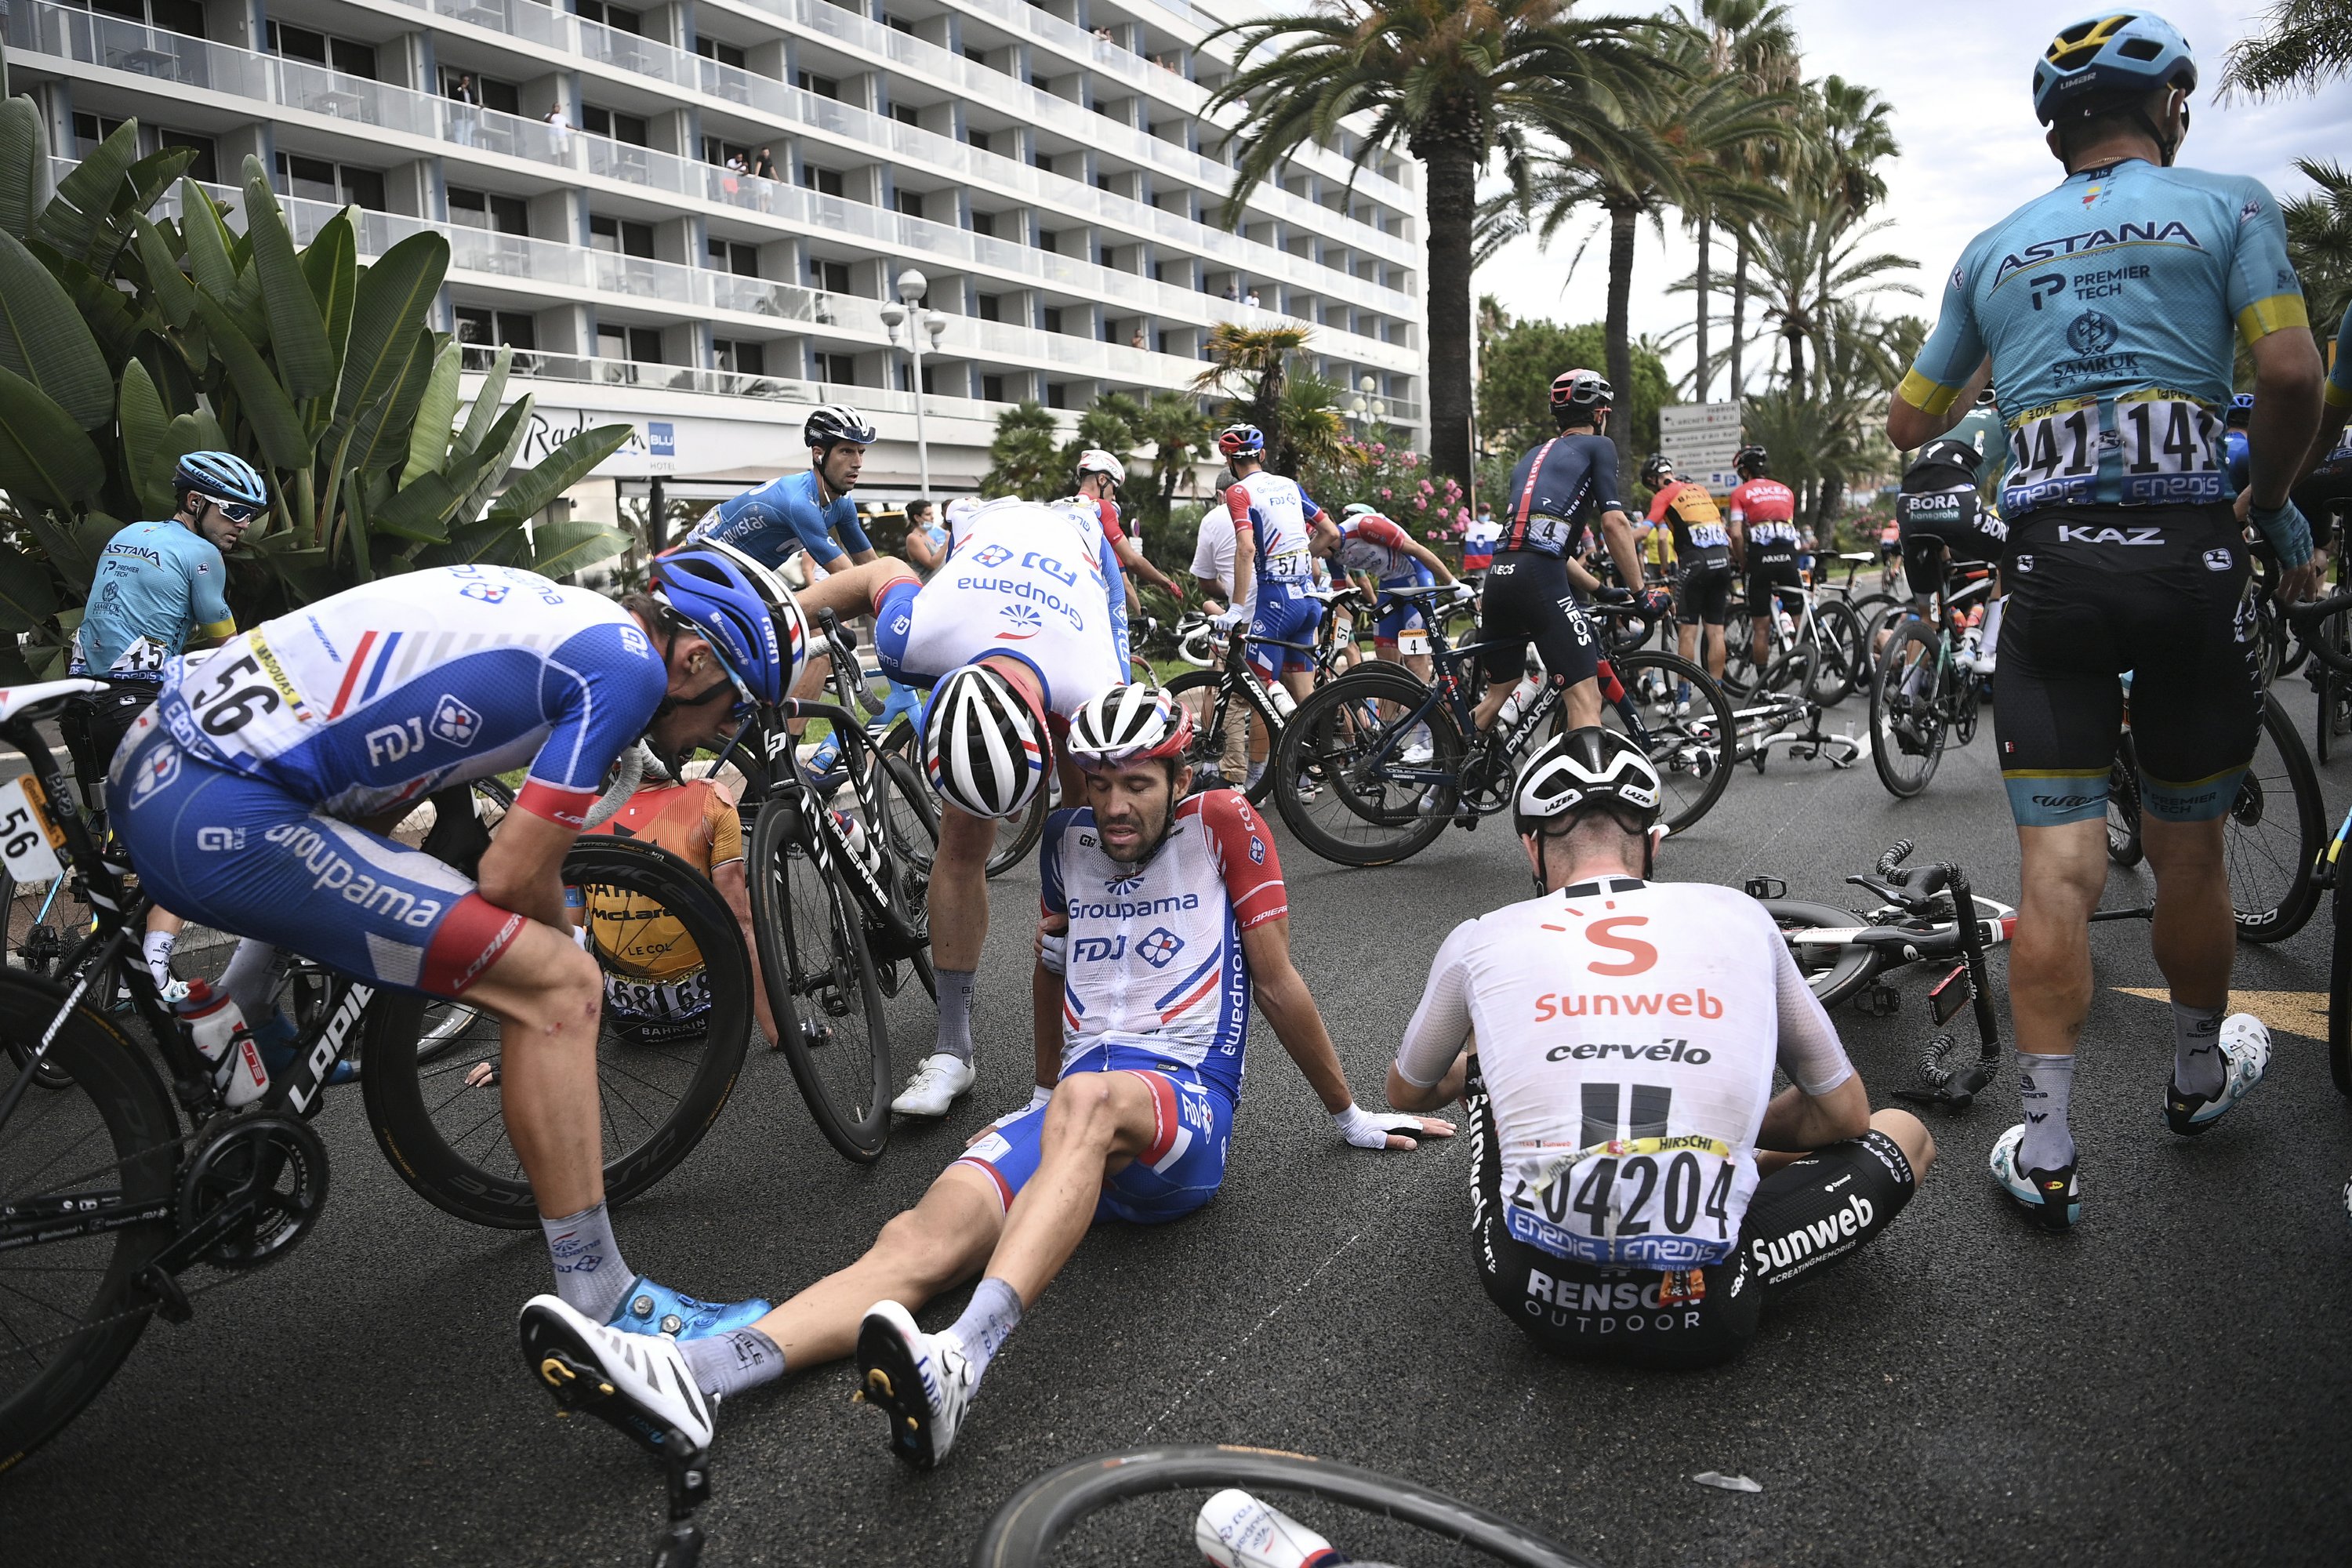 Already missing riders, Tour de France tackles tough Stage 2 - The Associated Press